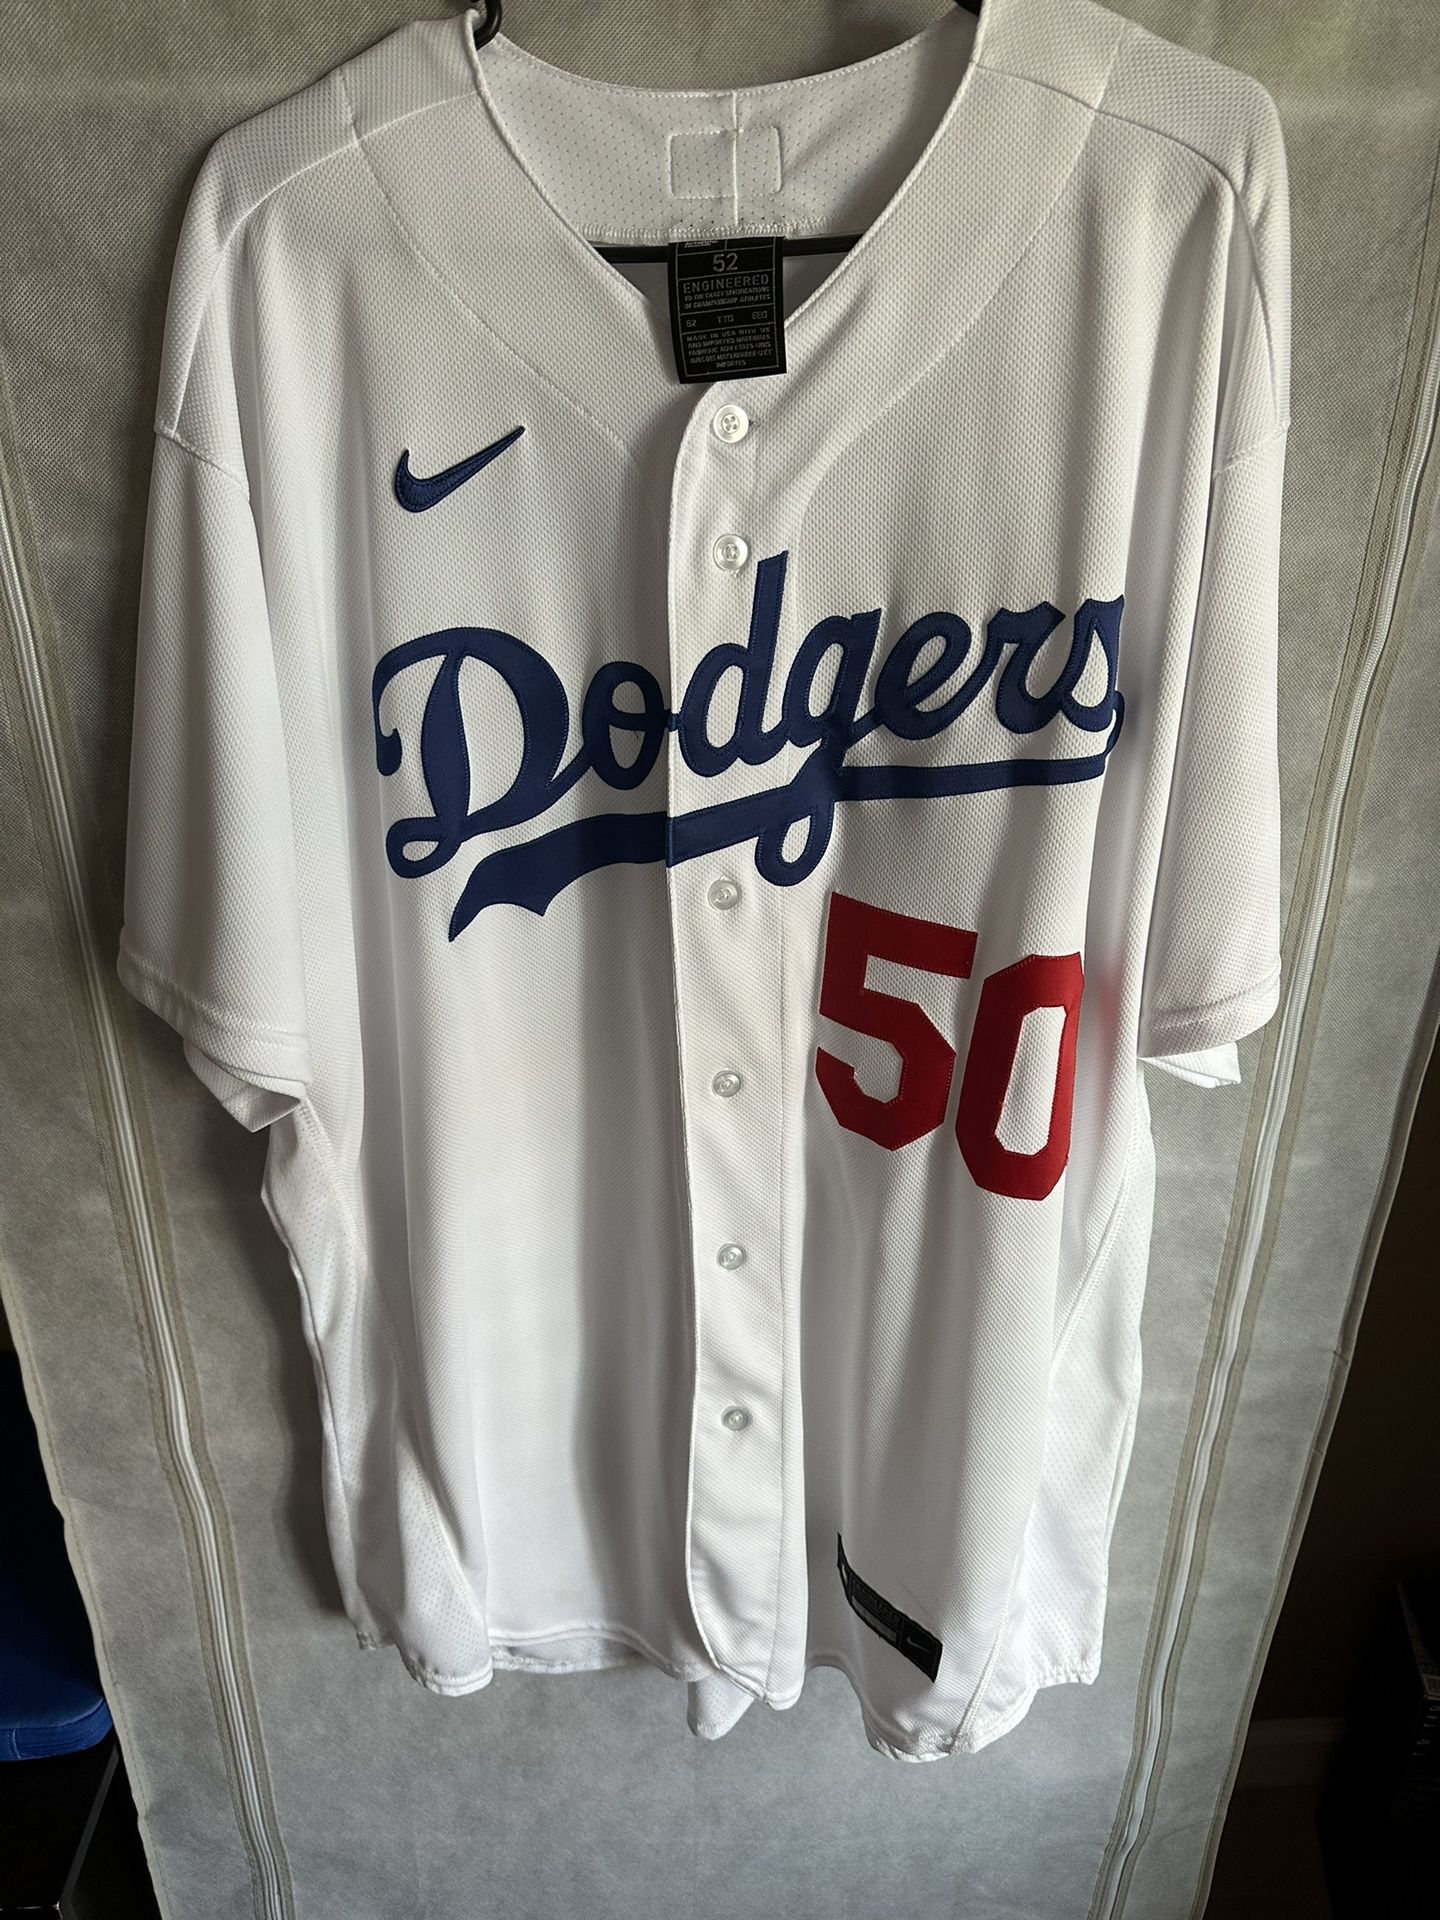 Nike Los Angeles Dodgers “Mookie Betts”Authentic Player Worn Material Jersey  Mens Size2XL SzXXL Used Worn 1x for Sale in Hanford, CA - OfferUp